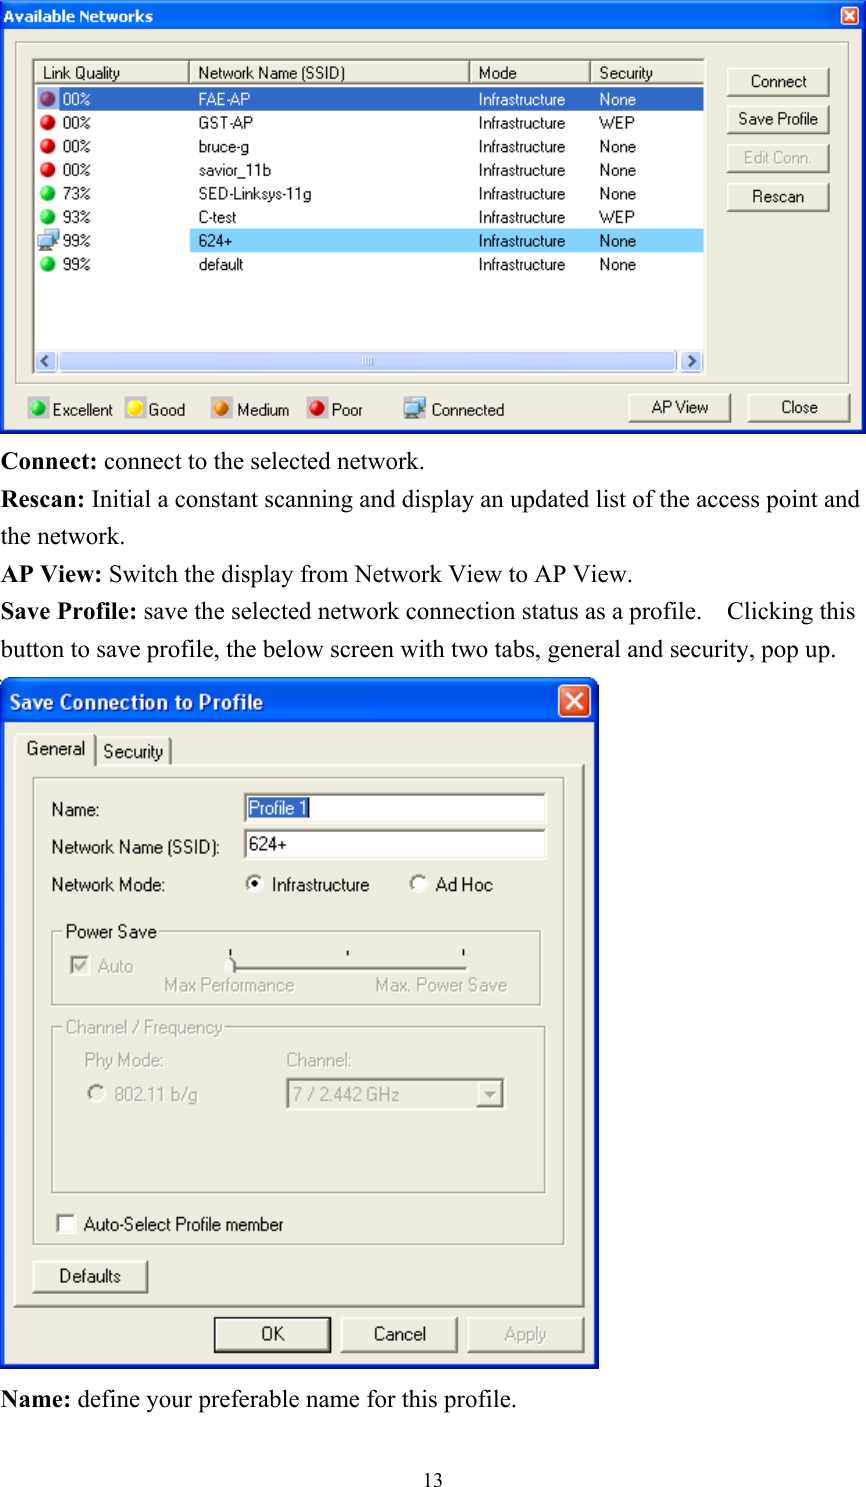  Connect: connect to the selected network. Rescan: Initial a constant scanning and display an updated list of the access point and the network. AP View: Switch the display from Network View to AP View. Save Profile: save the selected network connection status as a profile.    Clicking this button to save profile, the below screen with two tabs, general and security, pop up.  Name: define your preferable name for this profile.  13